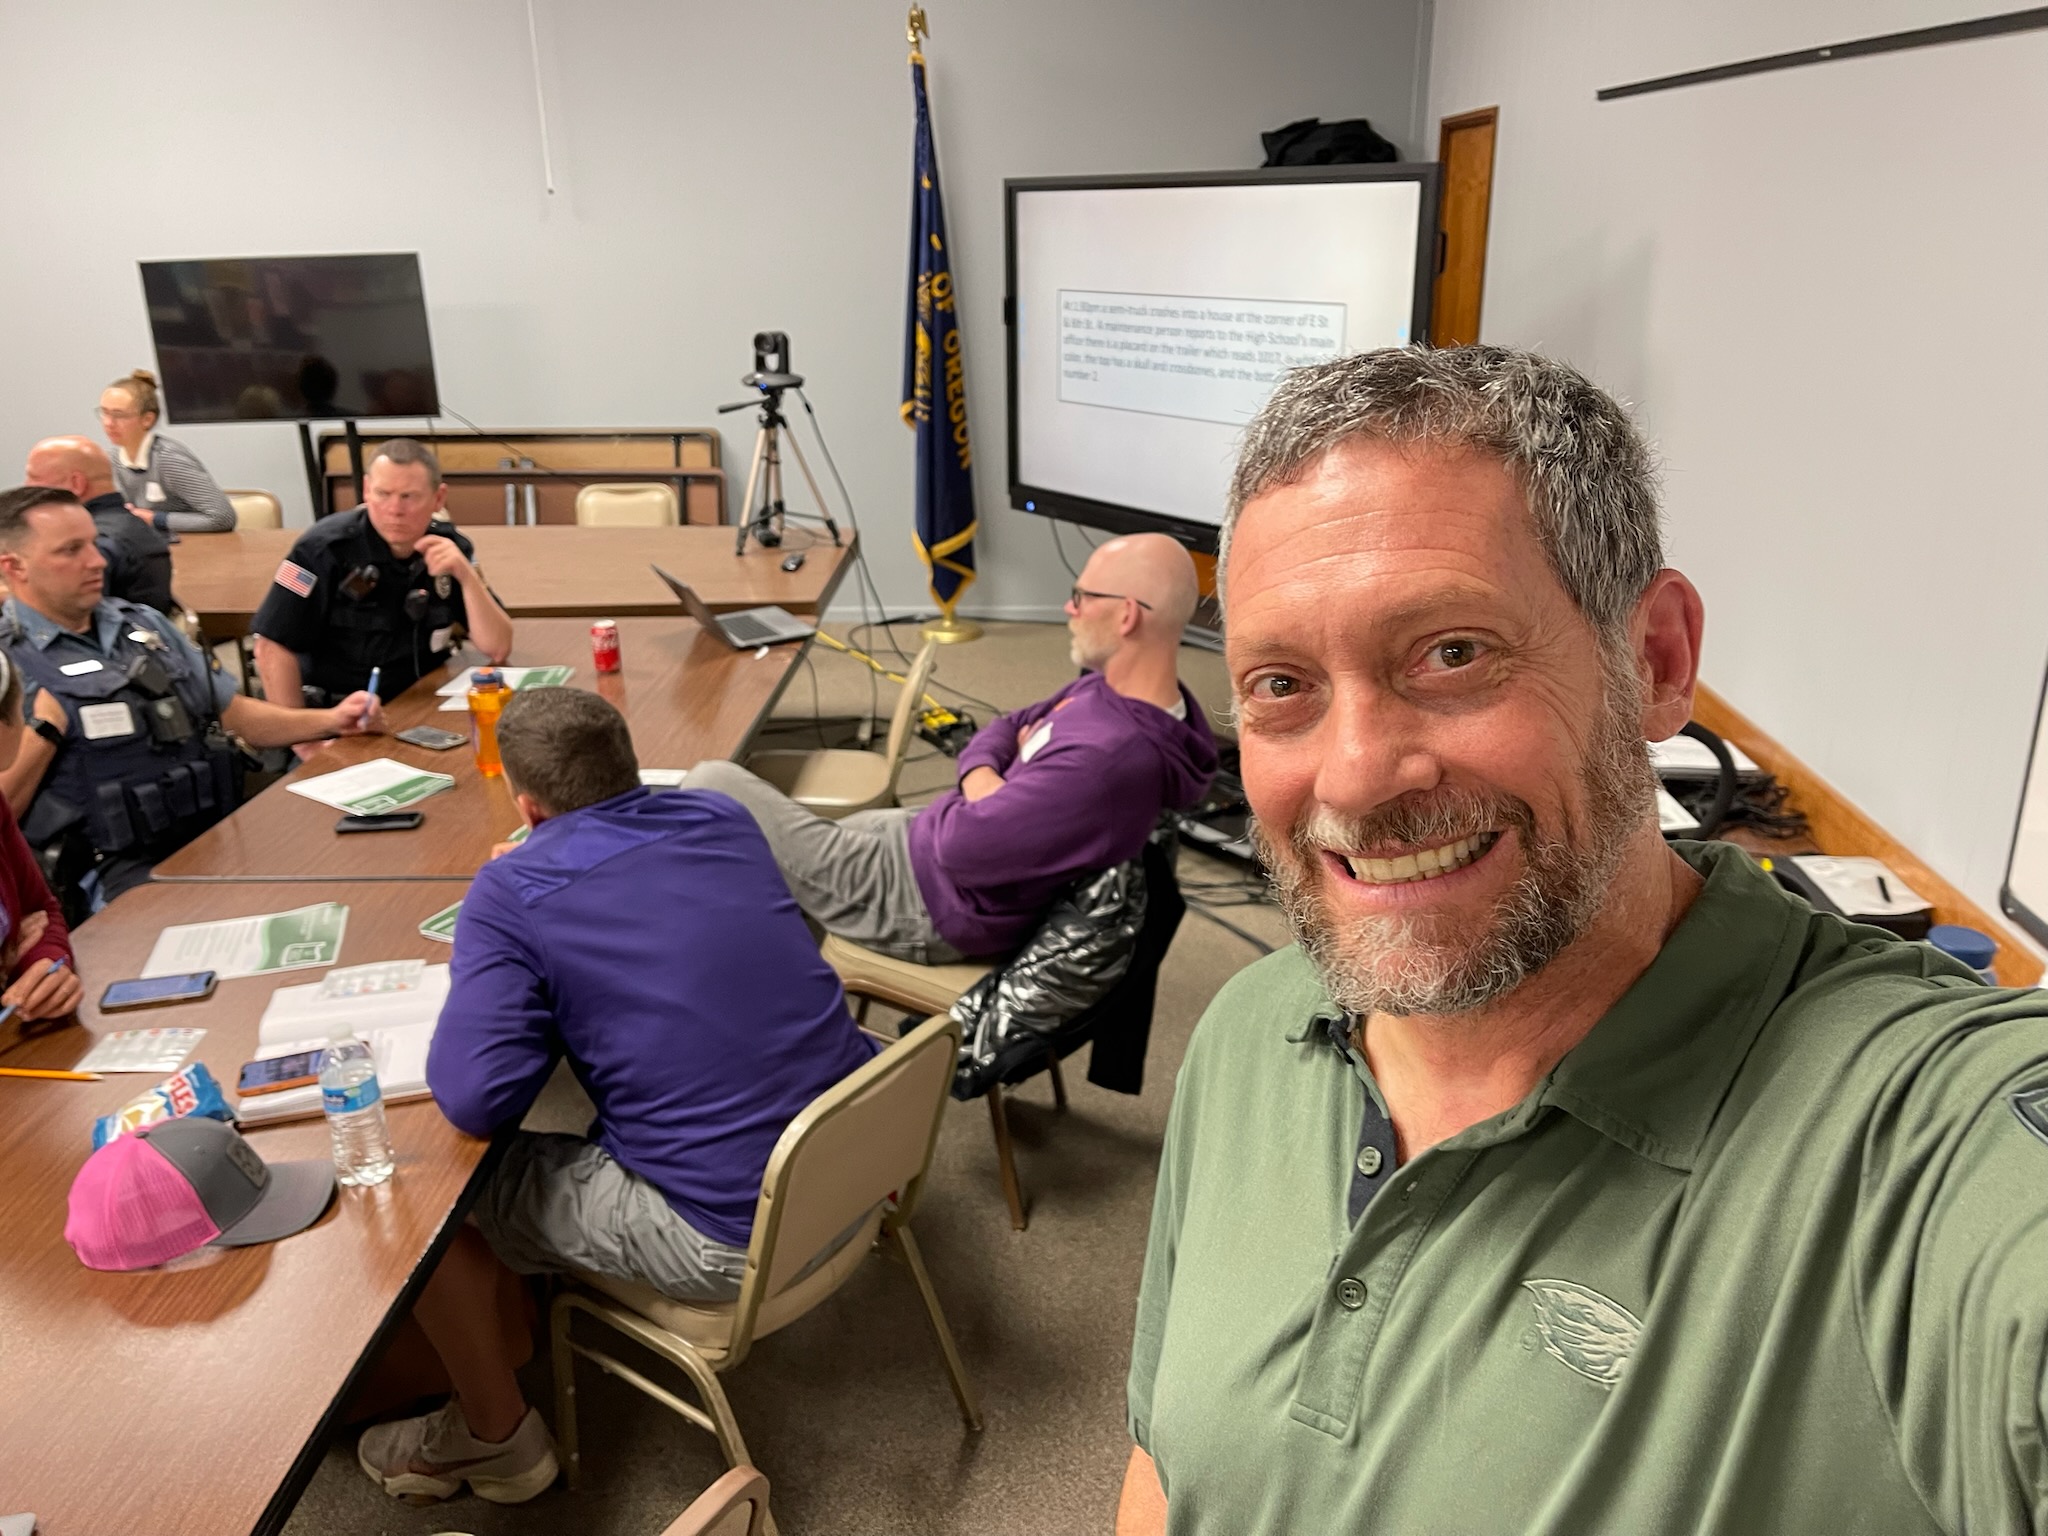 A smiling selfie of Dan Kraus, Clackamas ESD’s emergency operations/school safety specialist, leading a training session in a conference room with uniformed officers in attendance